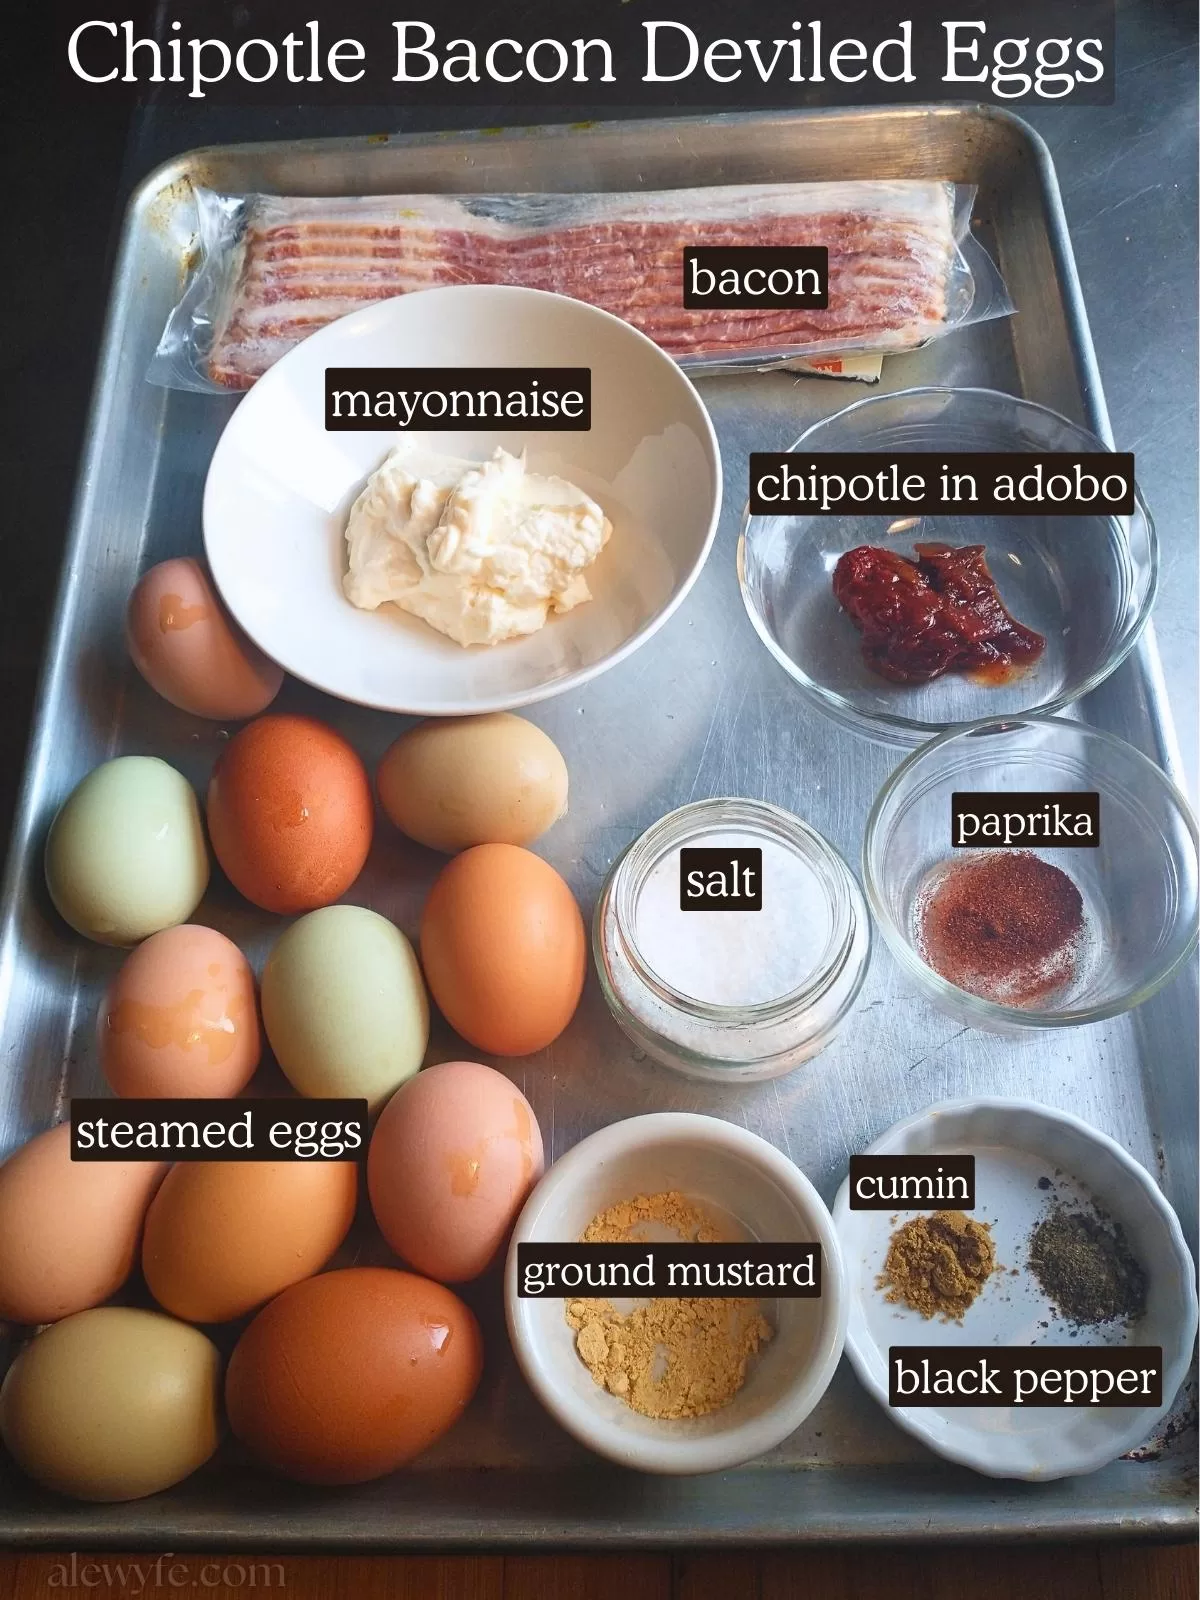 labeled ingredient photo for chipotle bacon deviled eggs.